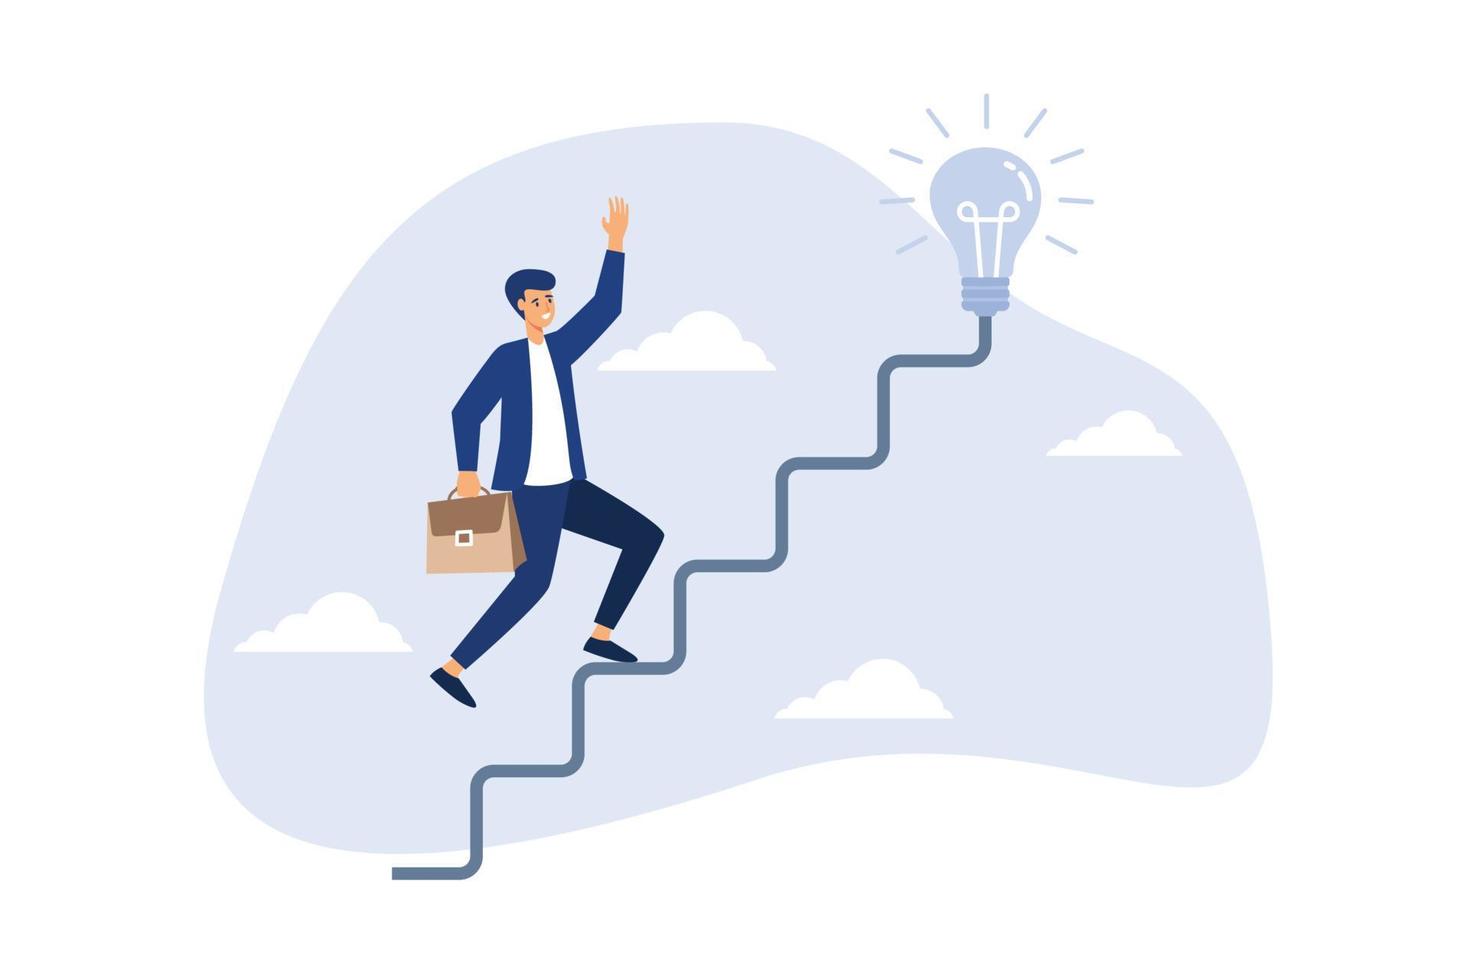 Creativity for business idea, thinking and brainstorm for new idea or opportunity, career path or goal achievement, businessman start walking on electricity line as stairway to big idea lightbulb. vector